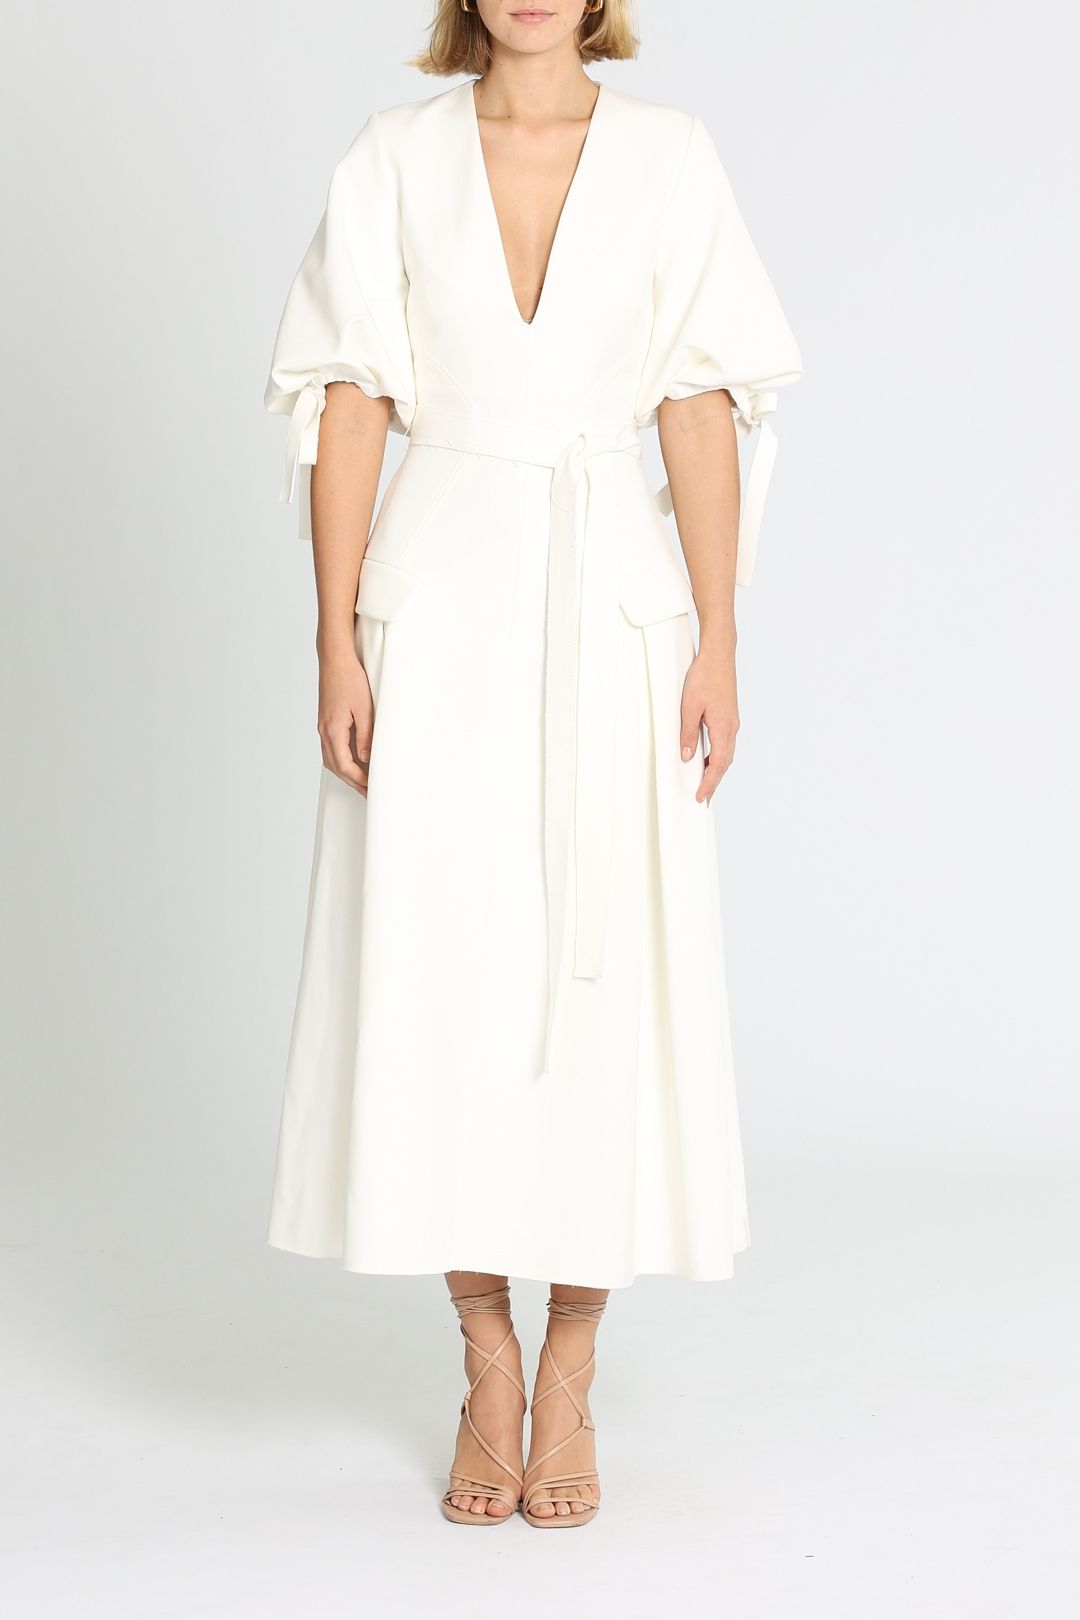 Morgan Robe & 3 in 1 Labor Gown Set